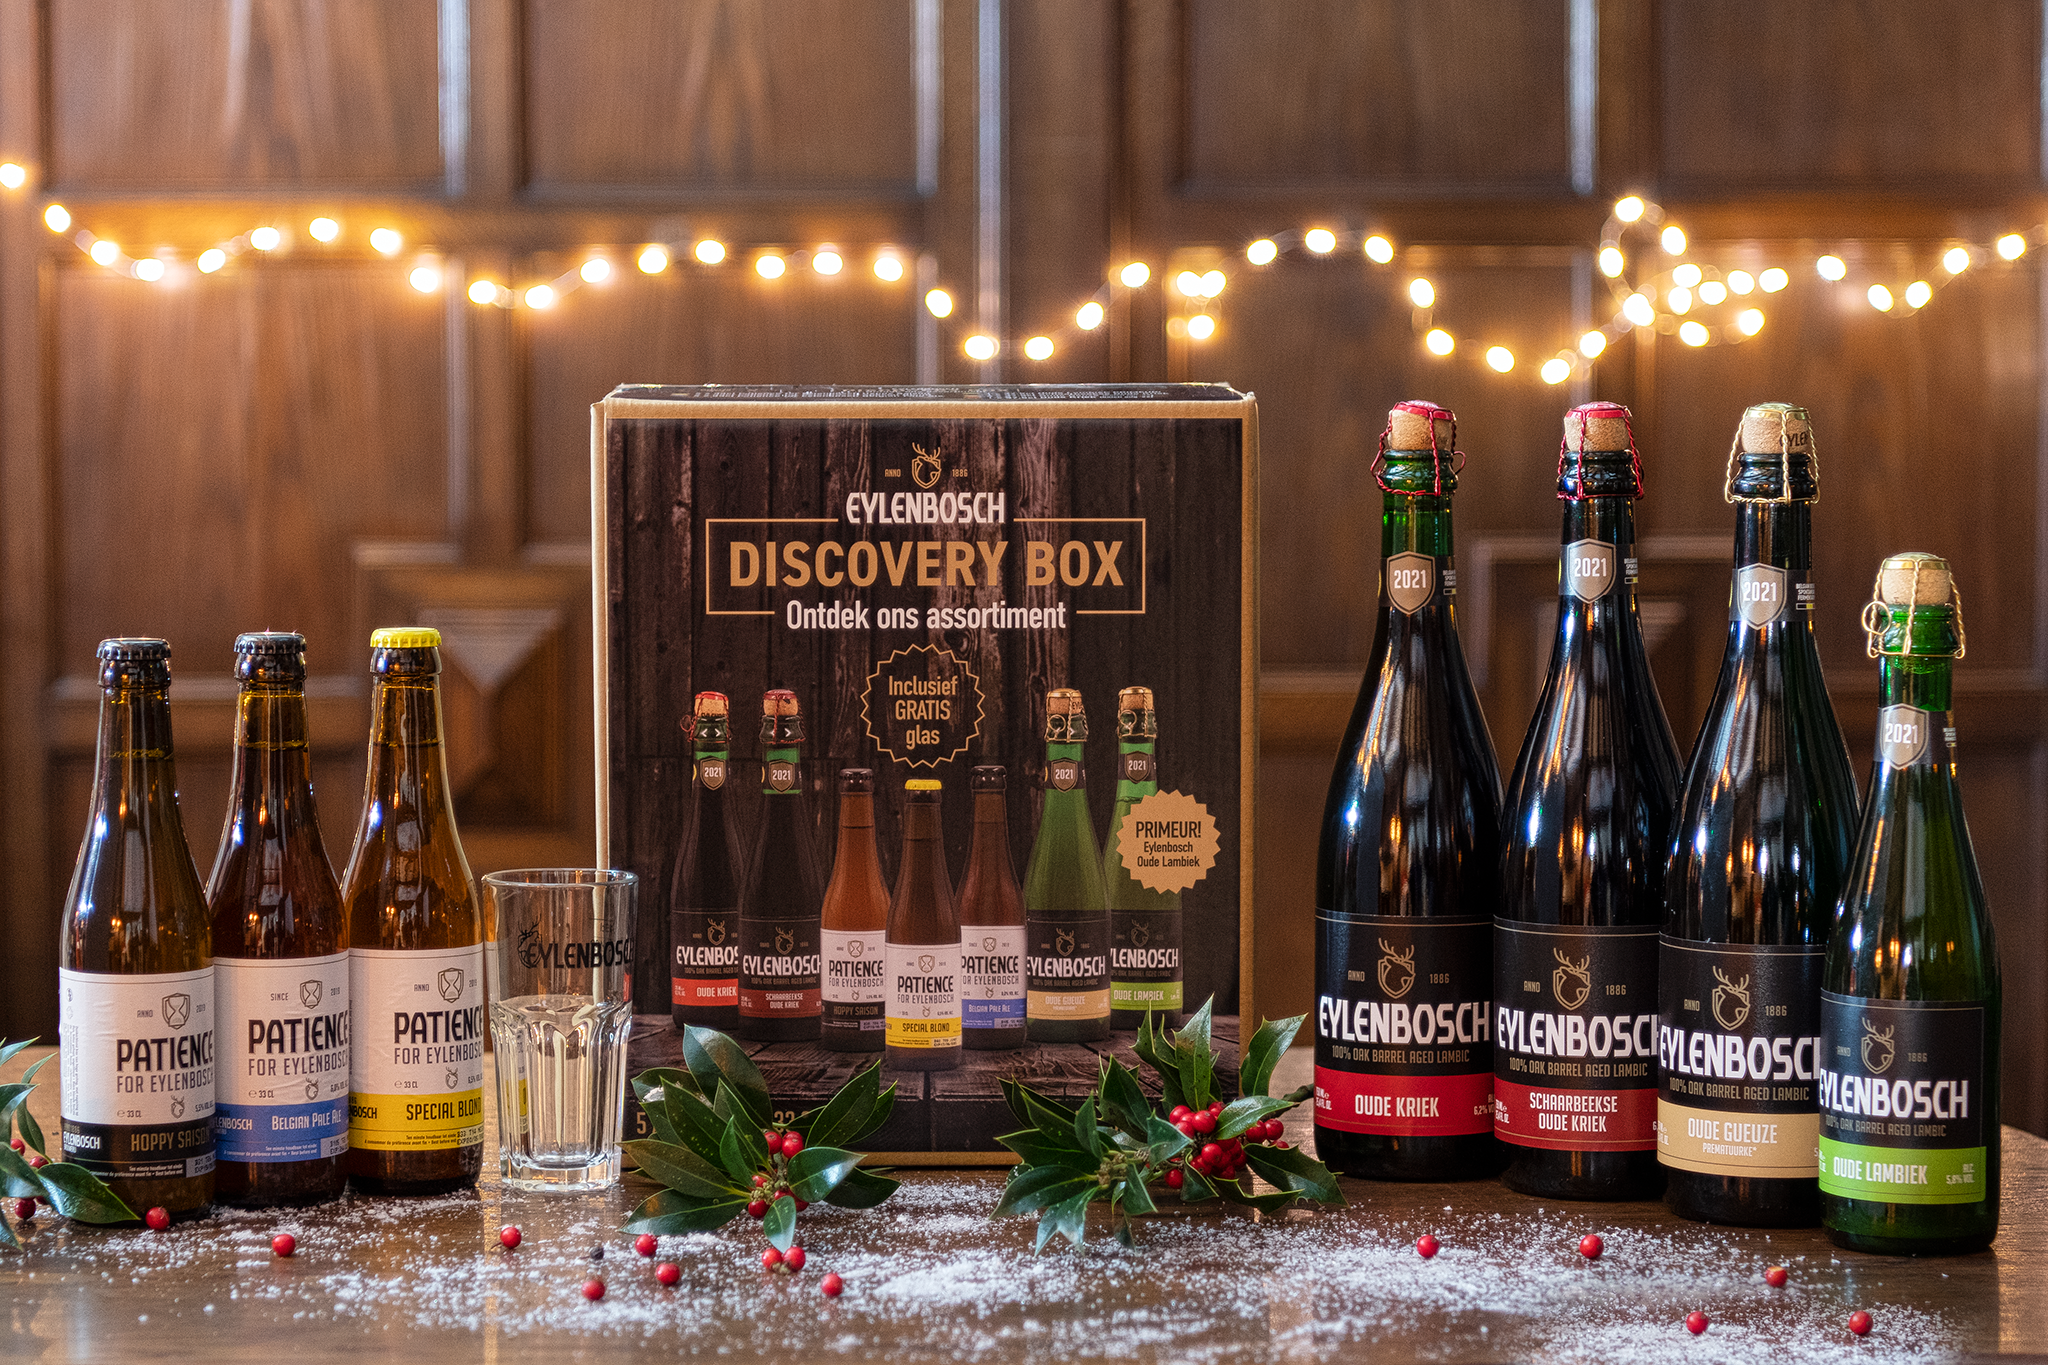 EYLENBOSCH EXPANDS ITS ASSORTMENT WITH OLD LAMBIC & DISCOVERY BOXES